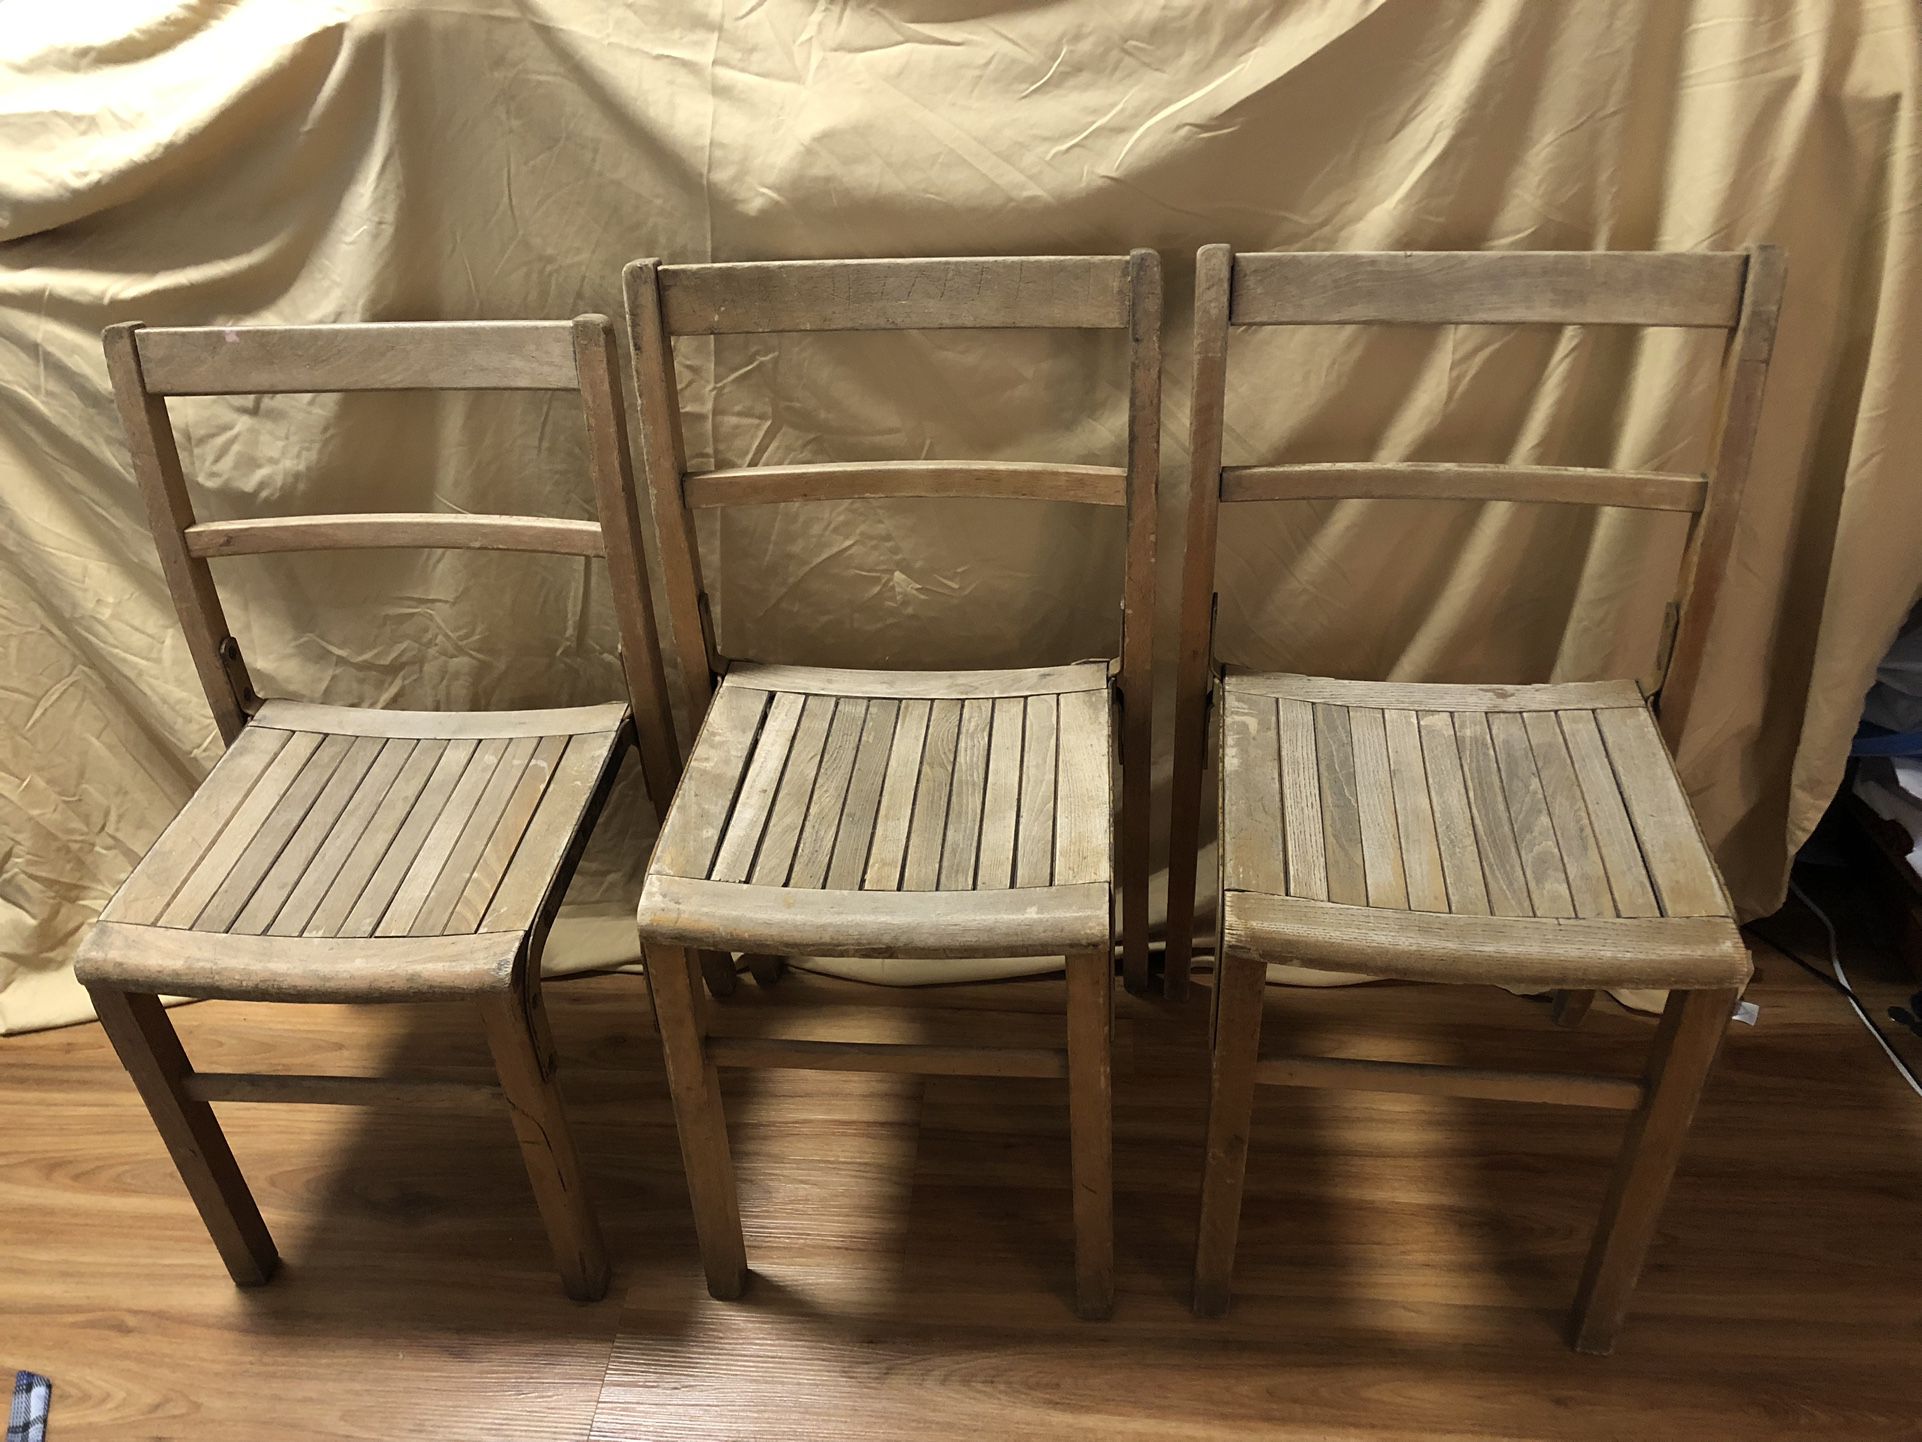 3x Vintage Wooden Chairs 